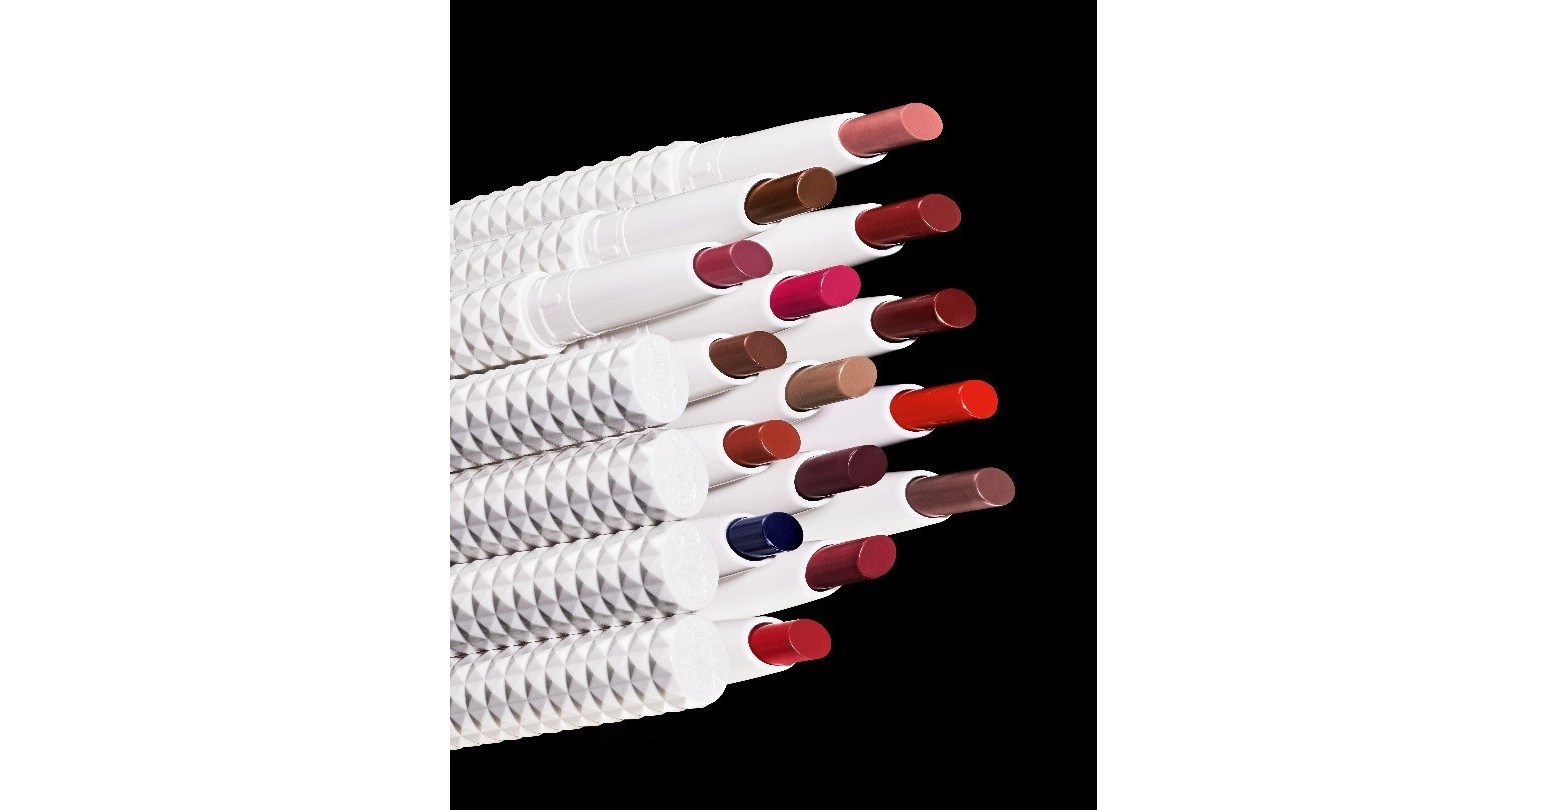 KVD Beauty’s New Part-Breaking Lipstick That Brings together Superior-Pigment Shade and Hydrating Lip Treatment